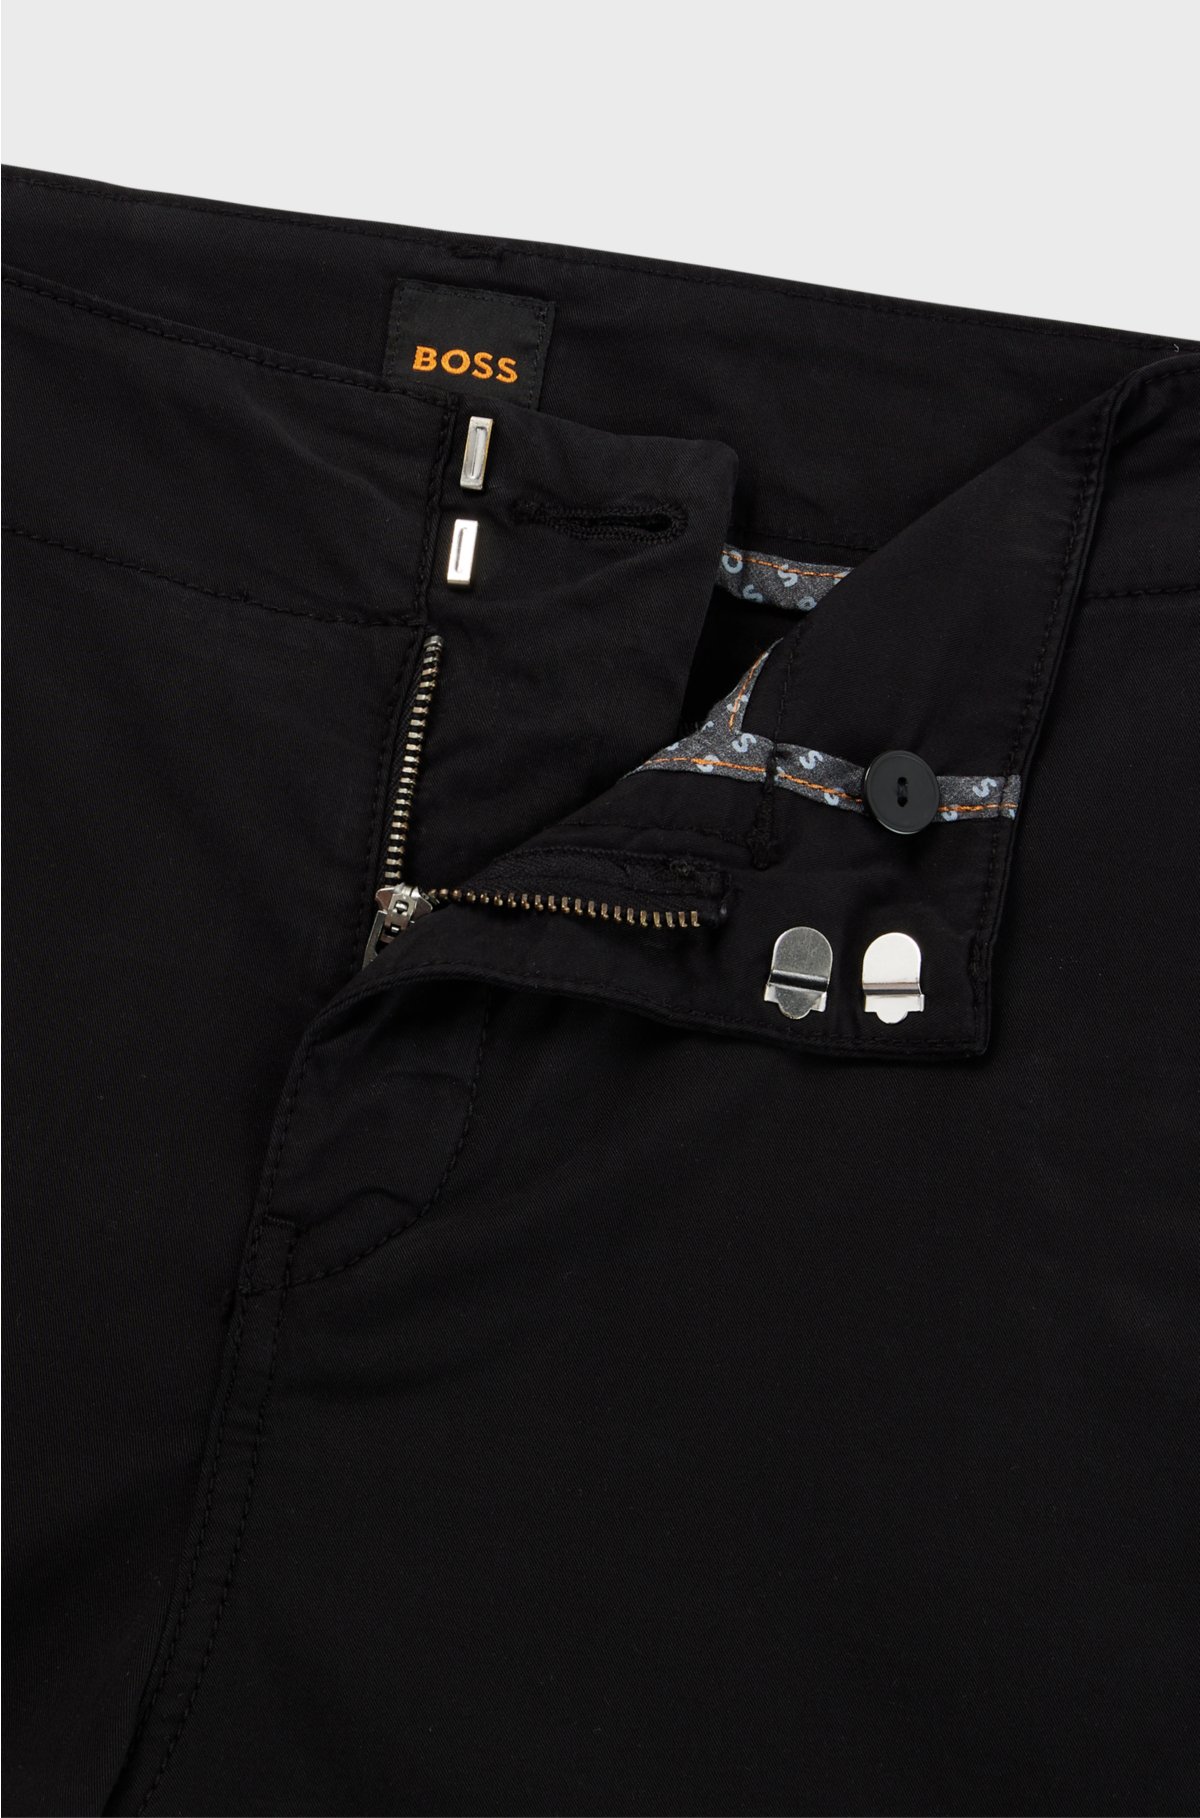 Relaxed-fit trousers in stretch-cotton twill, Black